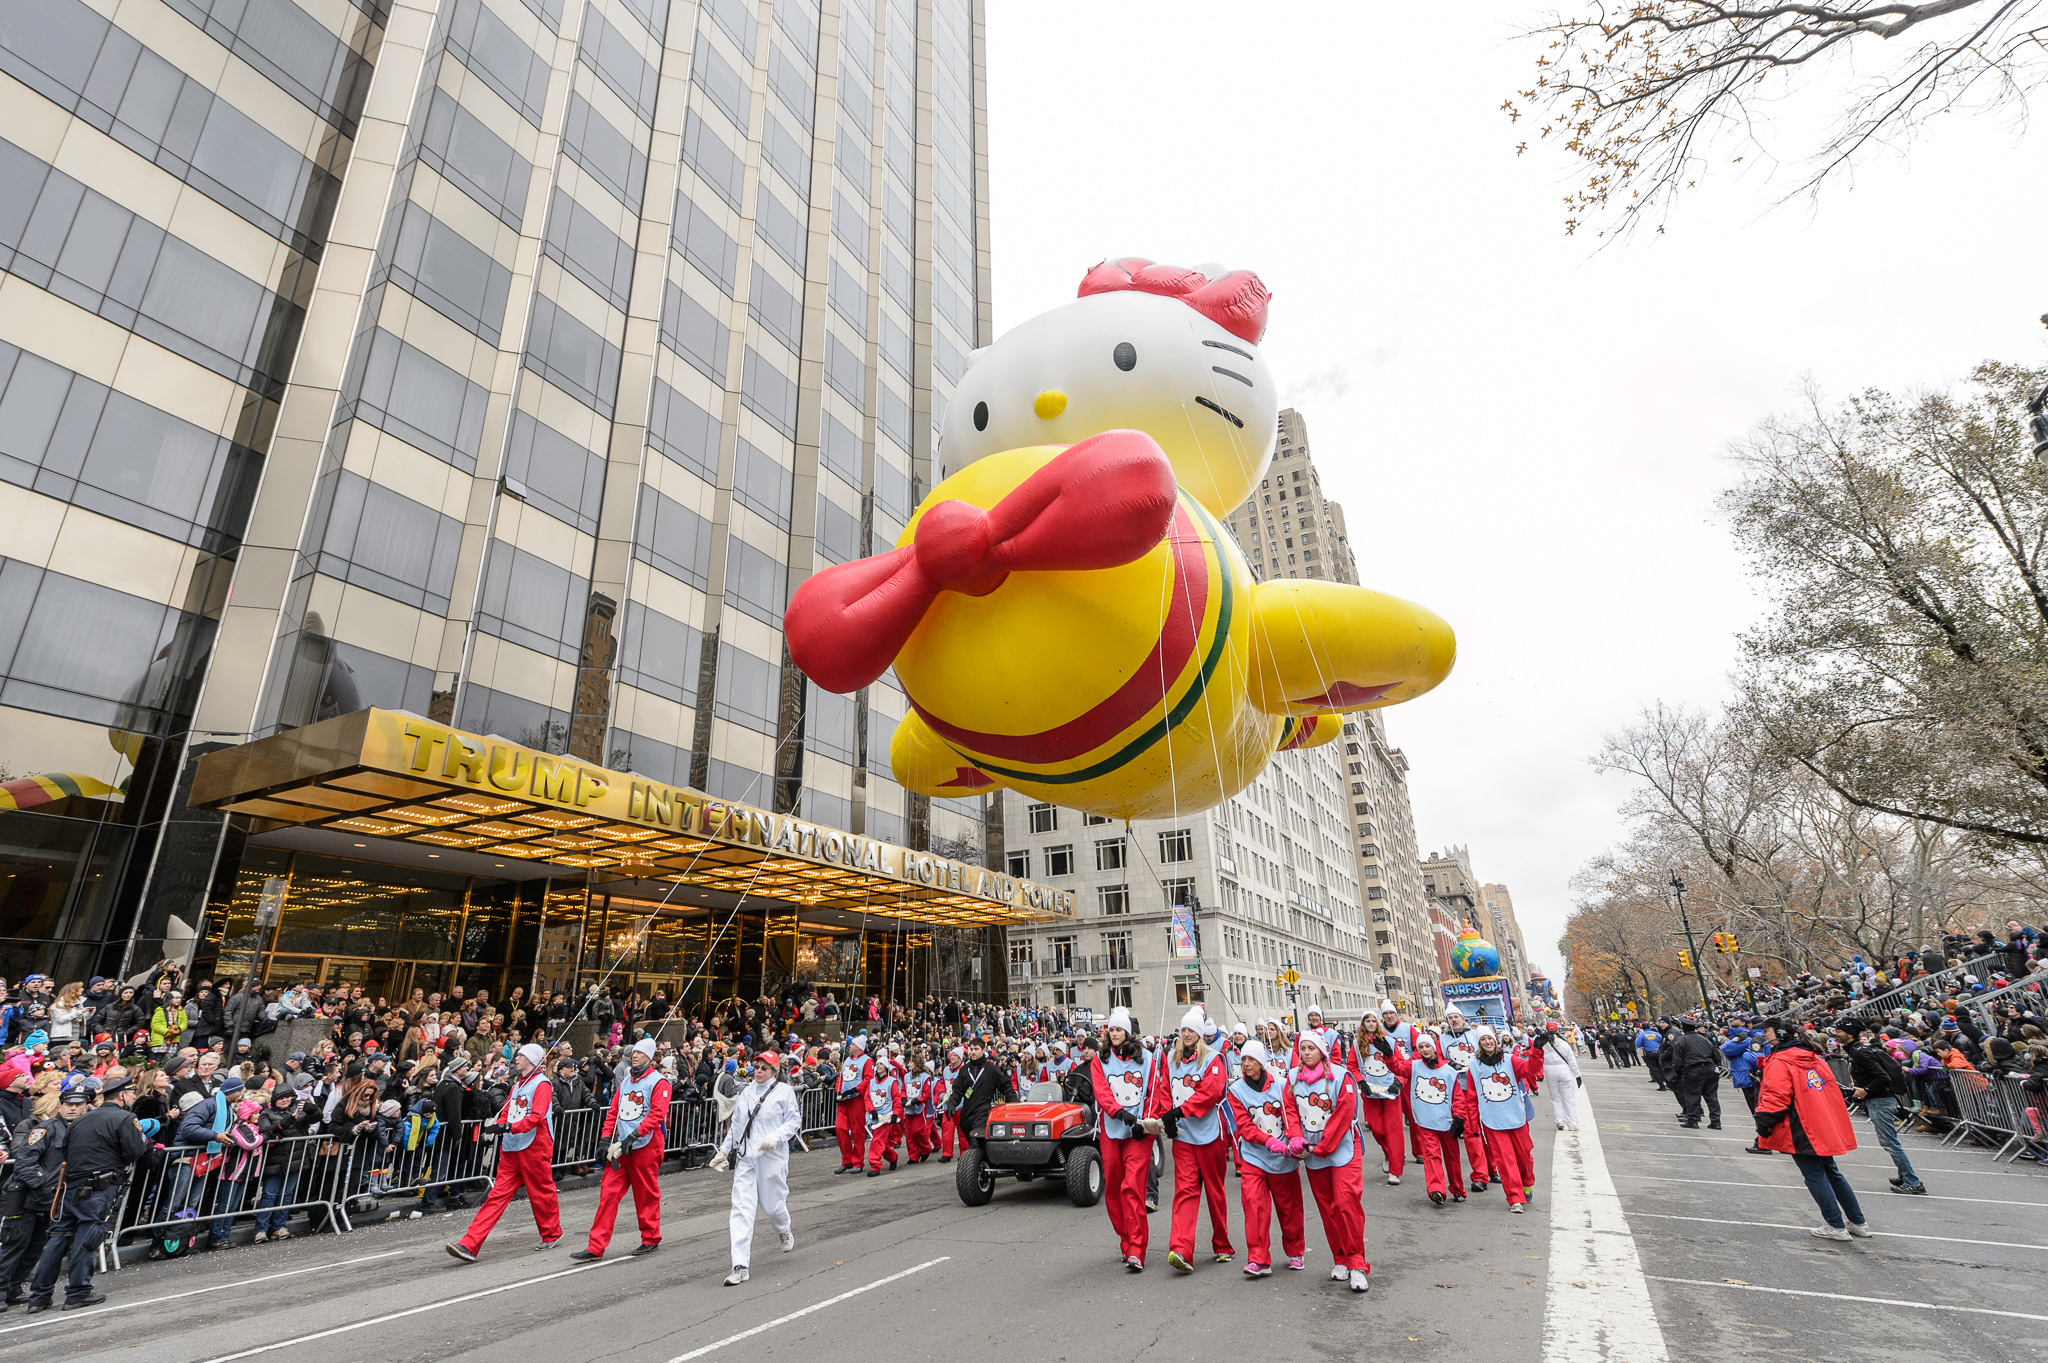 Macy's Parade balloons slideshow and inflation information